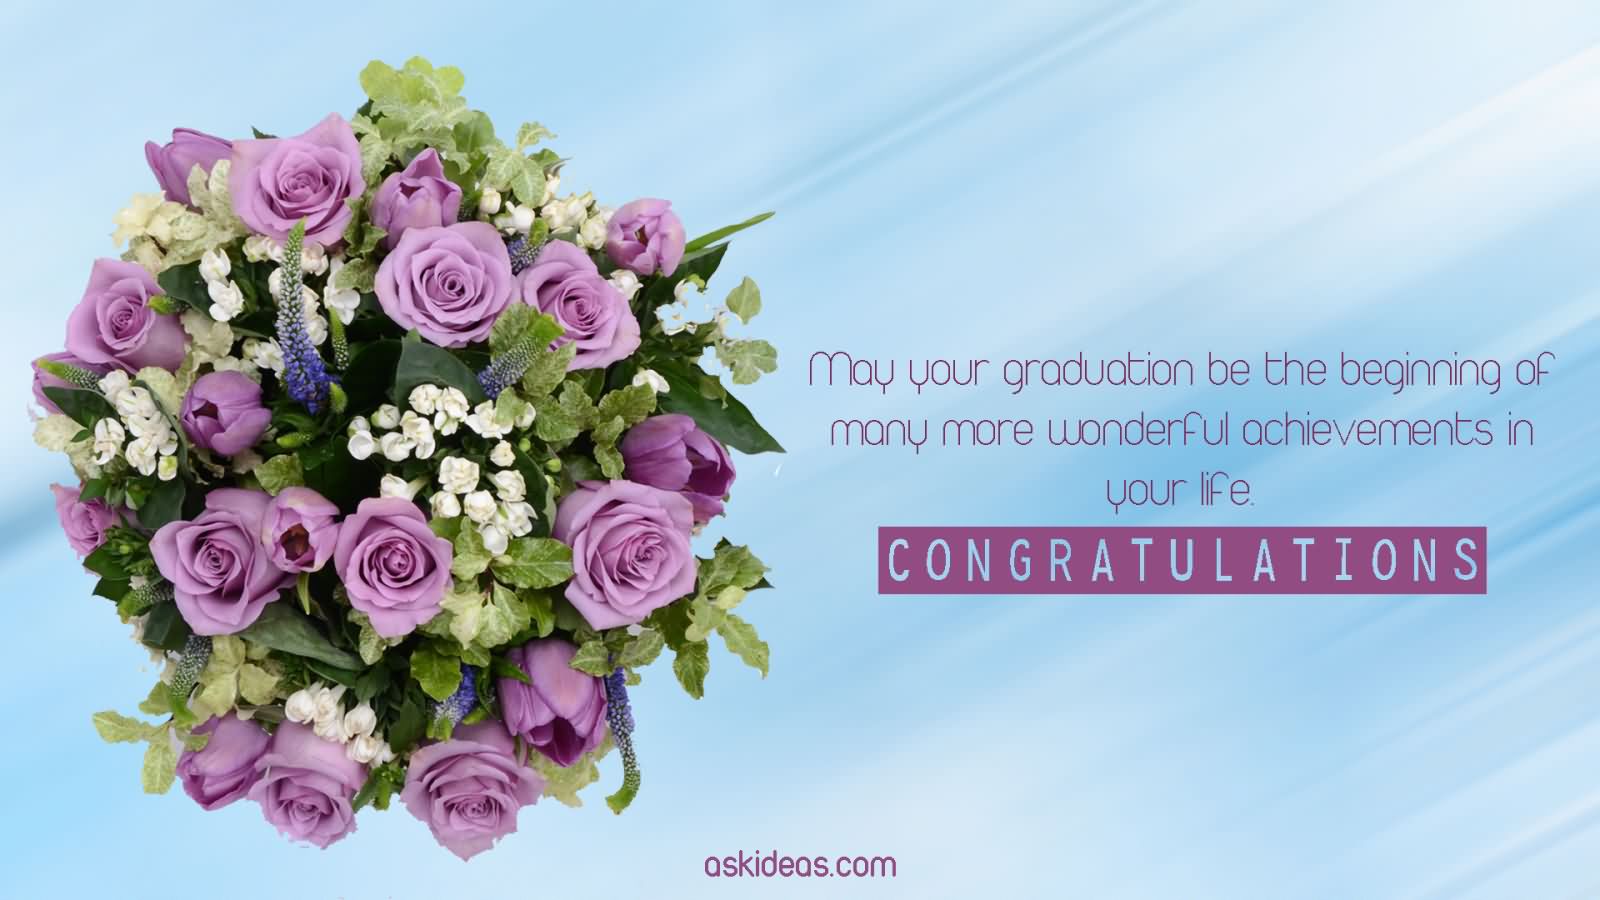 May your graduation be the beginning of many more wonderful achievements in your life. Congratulations.